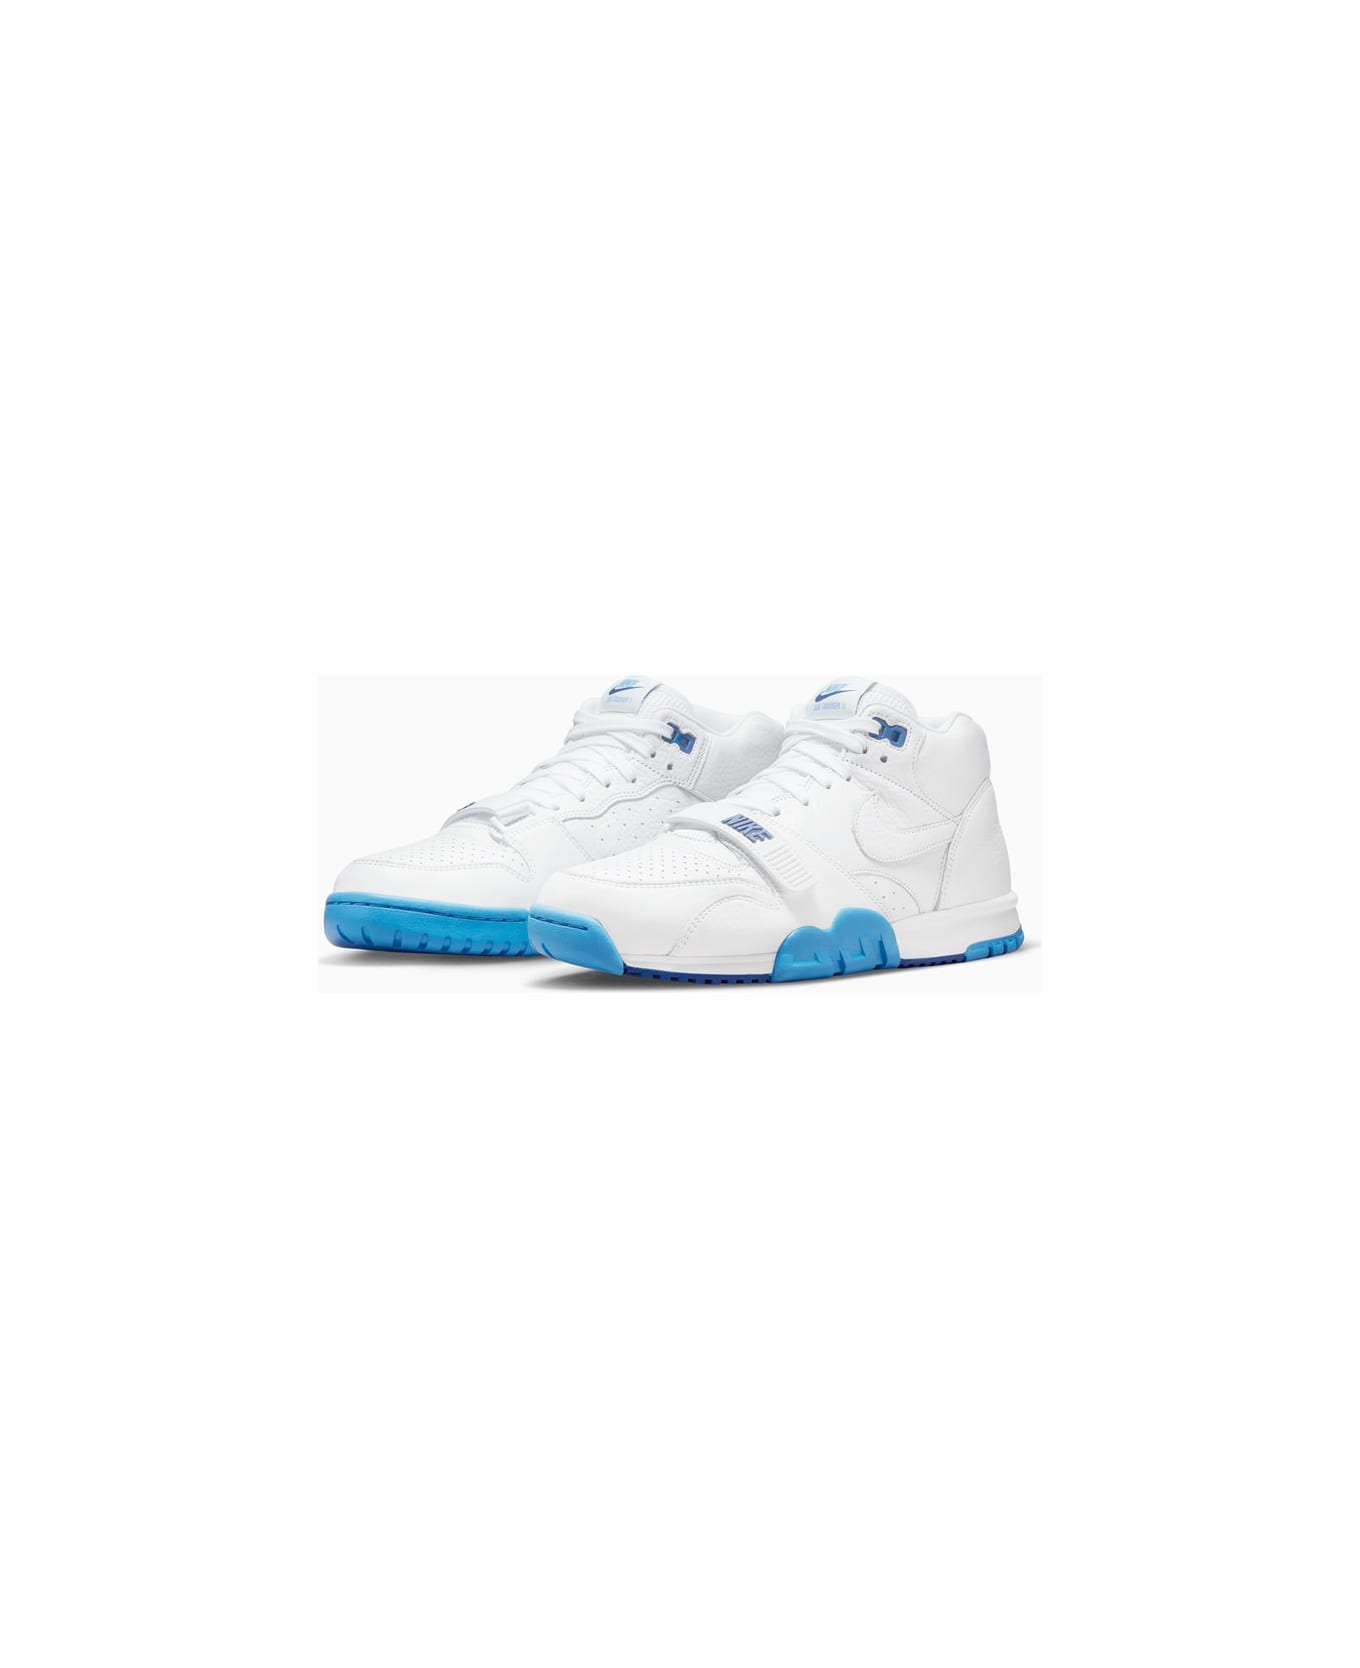 Nike Air Trainer 1 Sneakers Dr9997-100 - White スニーカー